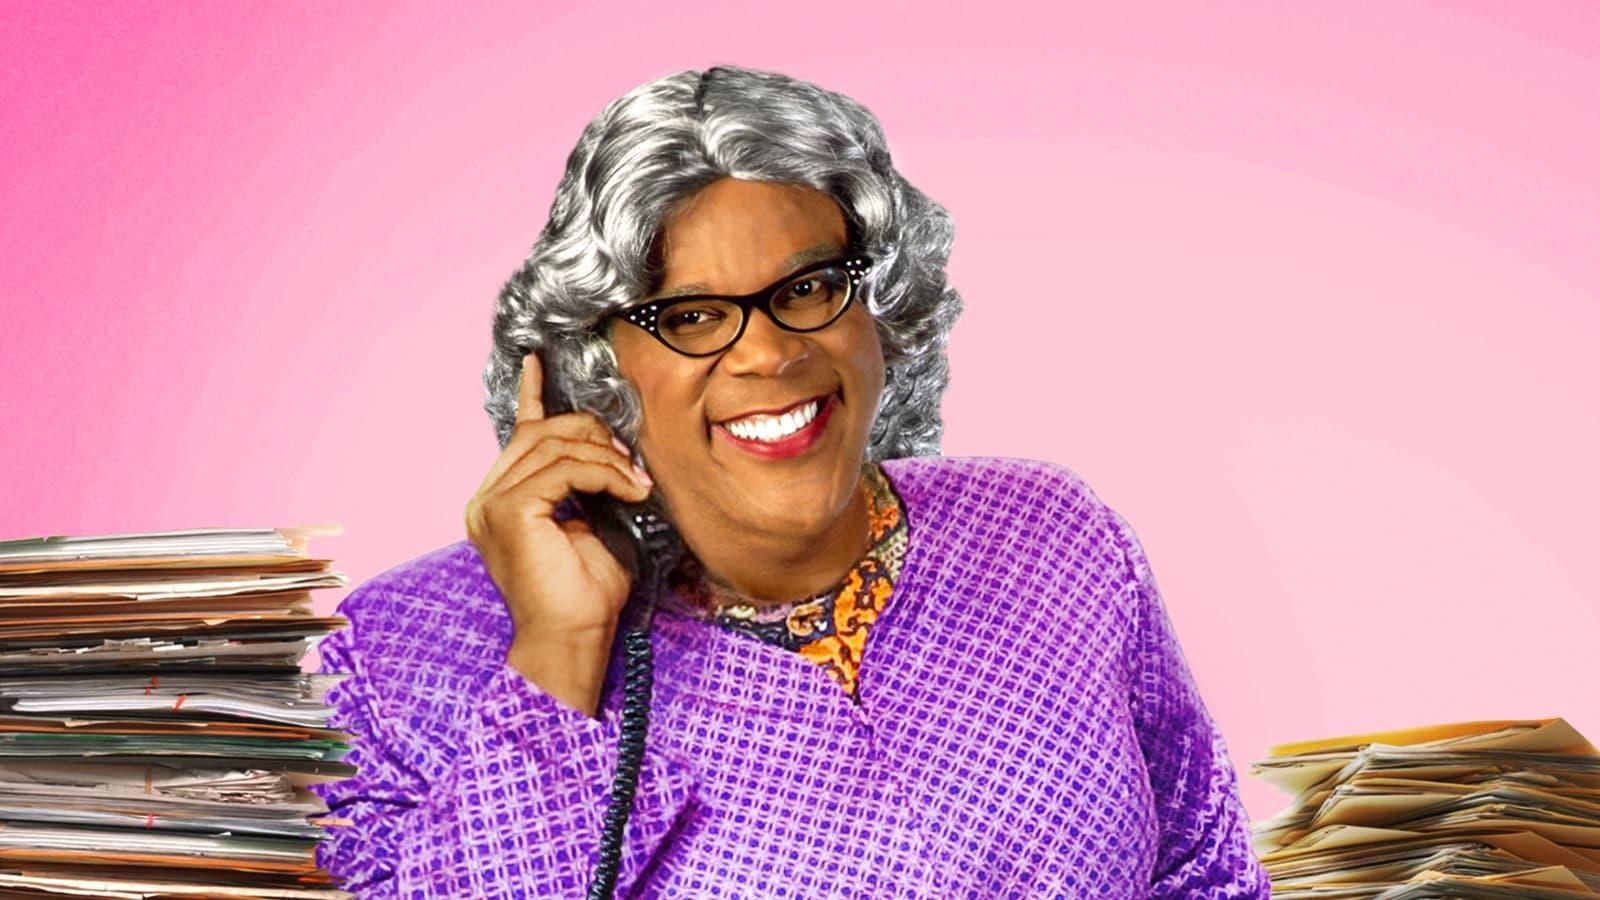 Tyler Perry's Madea Gets A Job - The Play backdrop